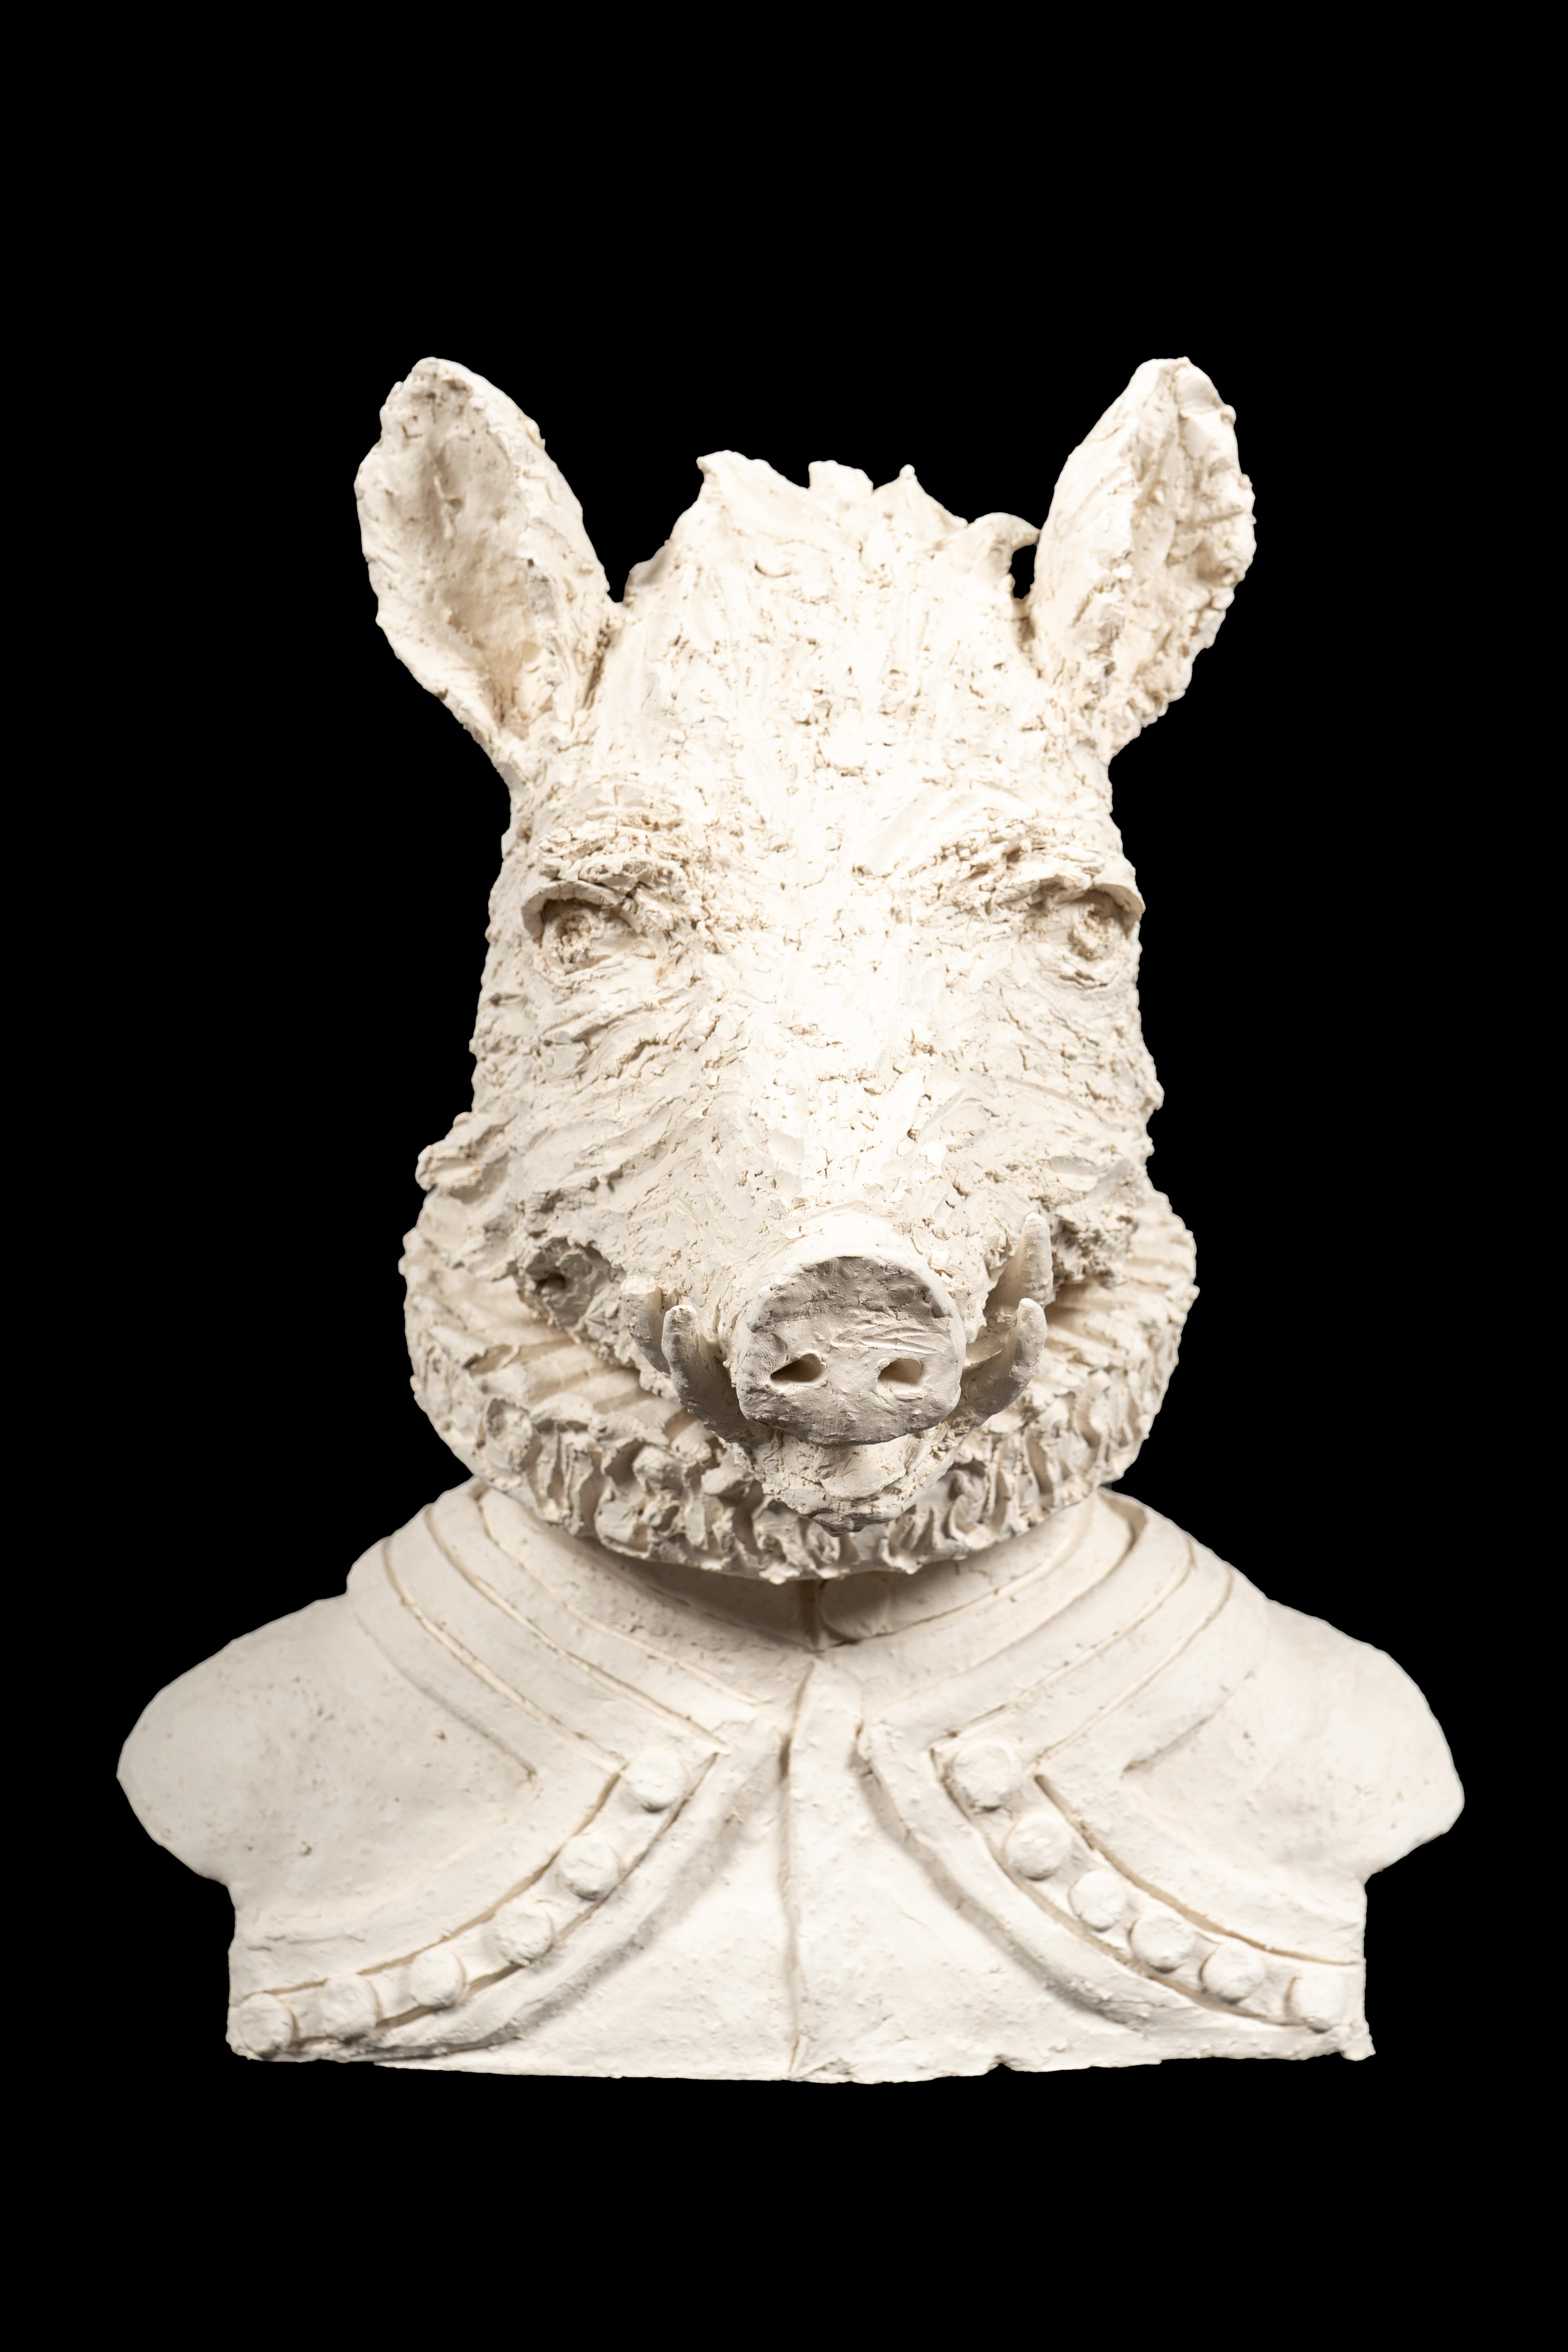 Anthropomorphic Terracotta Bust of a Boar wearing a Ruff. A charming one-of-a-kind sculpture made in France.

This unique Anthropomorphic Terracotta Bust of a Boar is a charming work of art that showcases the artist's exceptional skill and